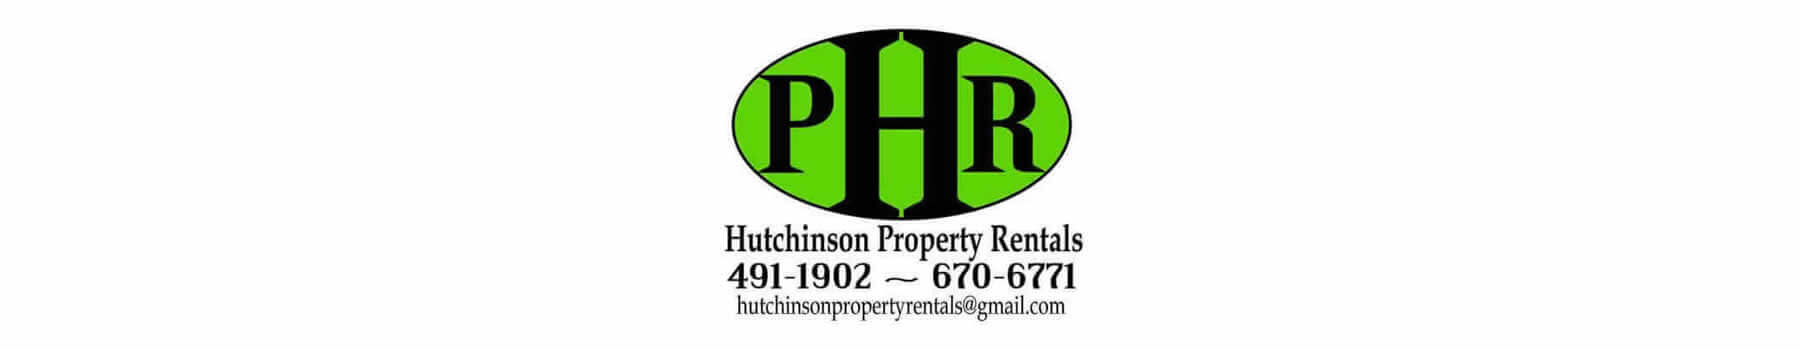 Featured image for Hutchinson Property Rentals.